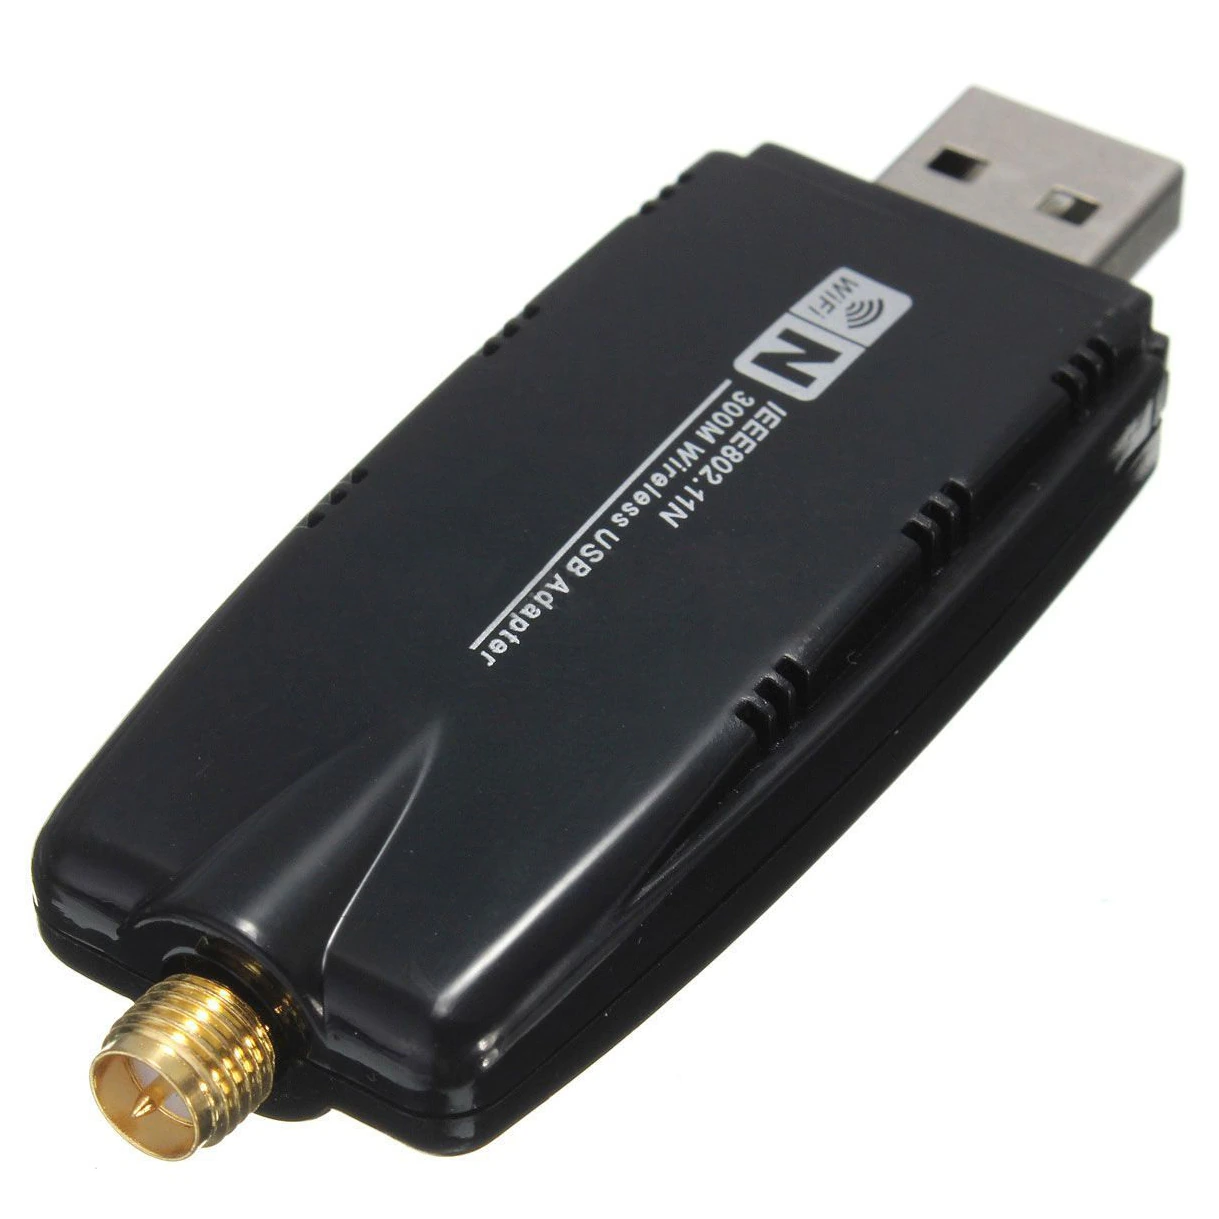 What Is Wifi Adapter